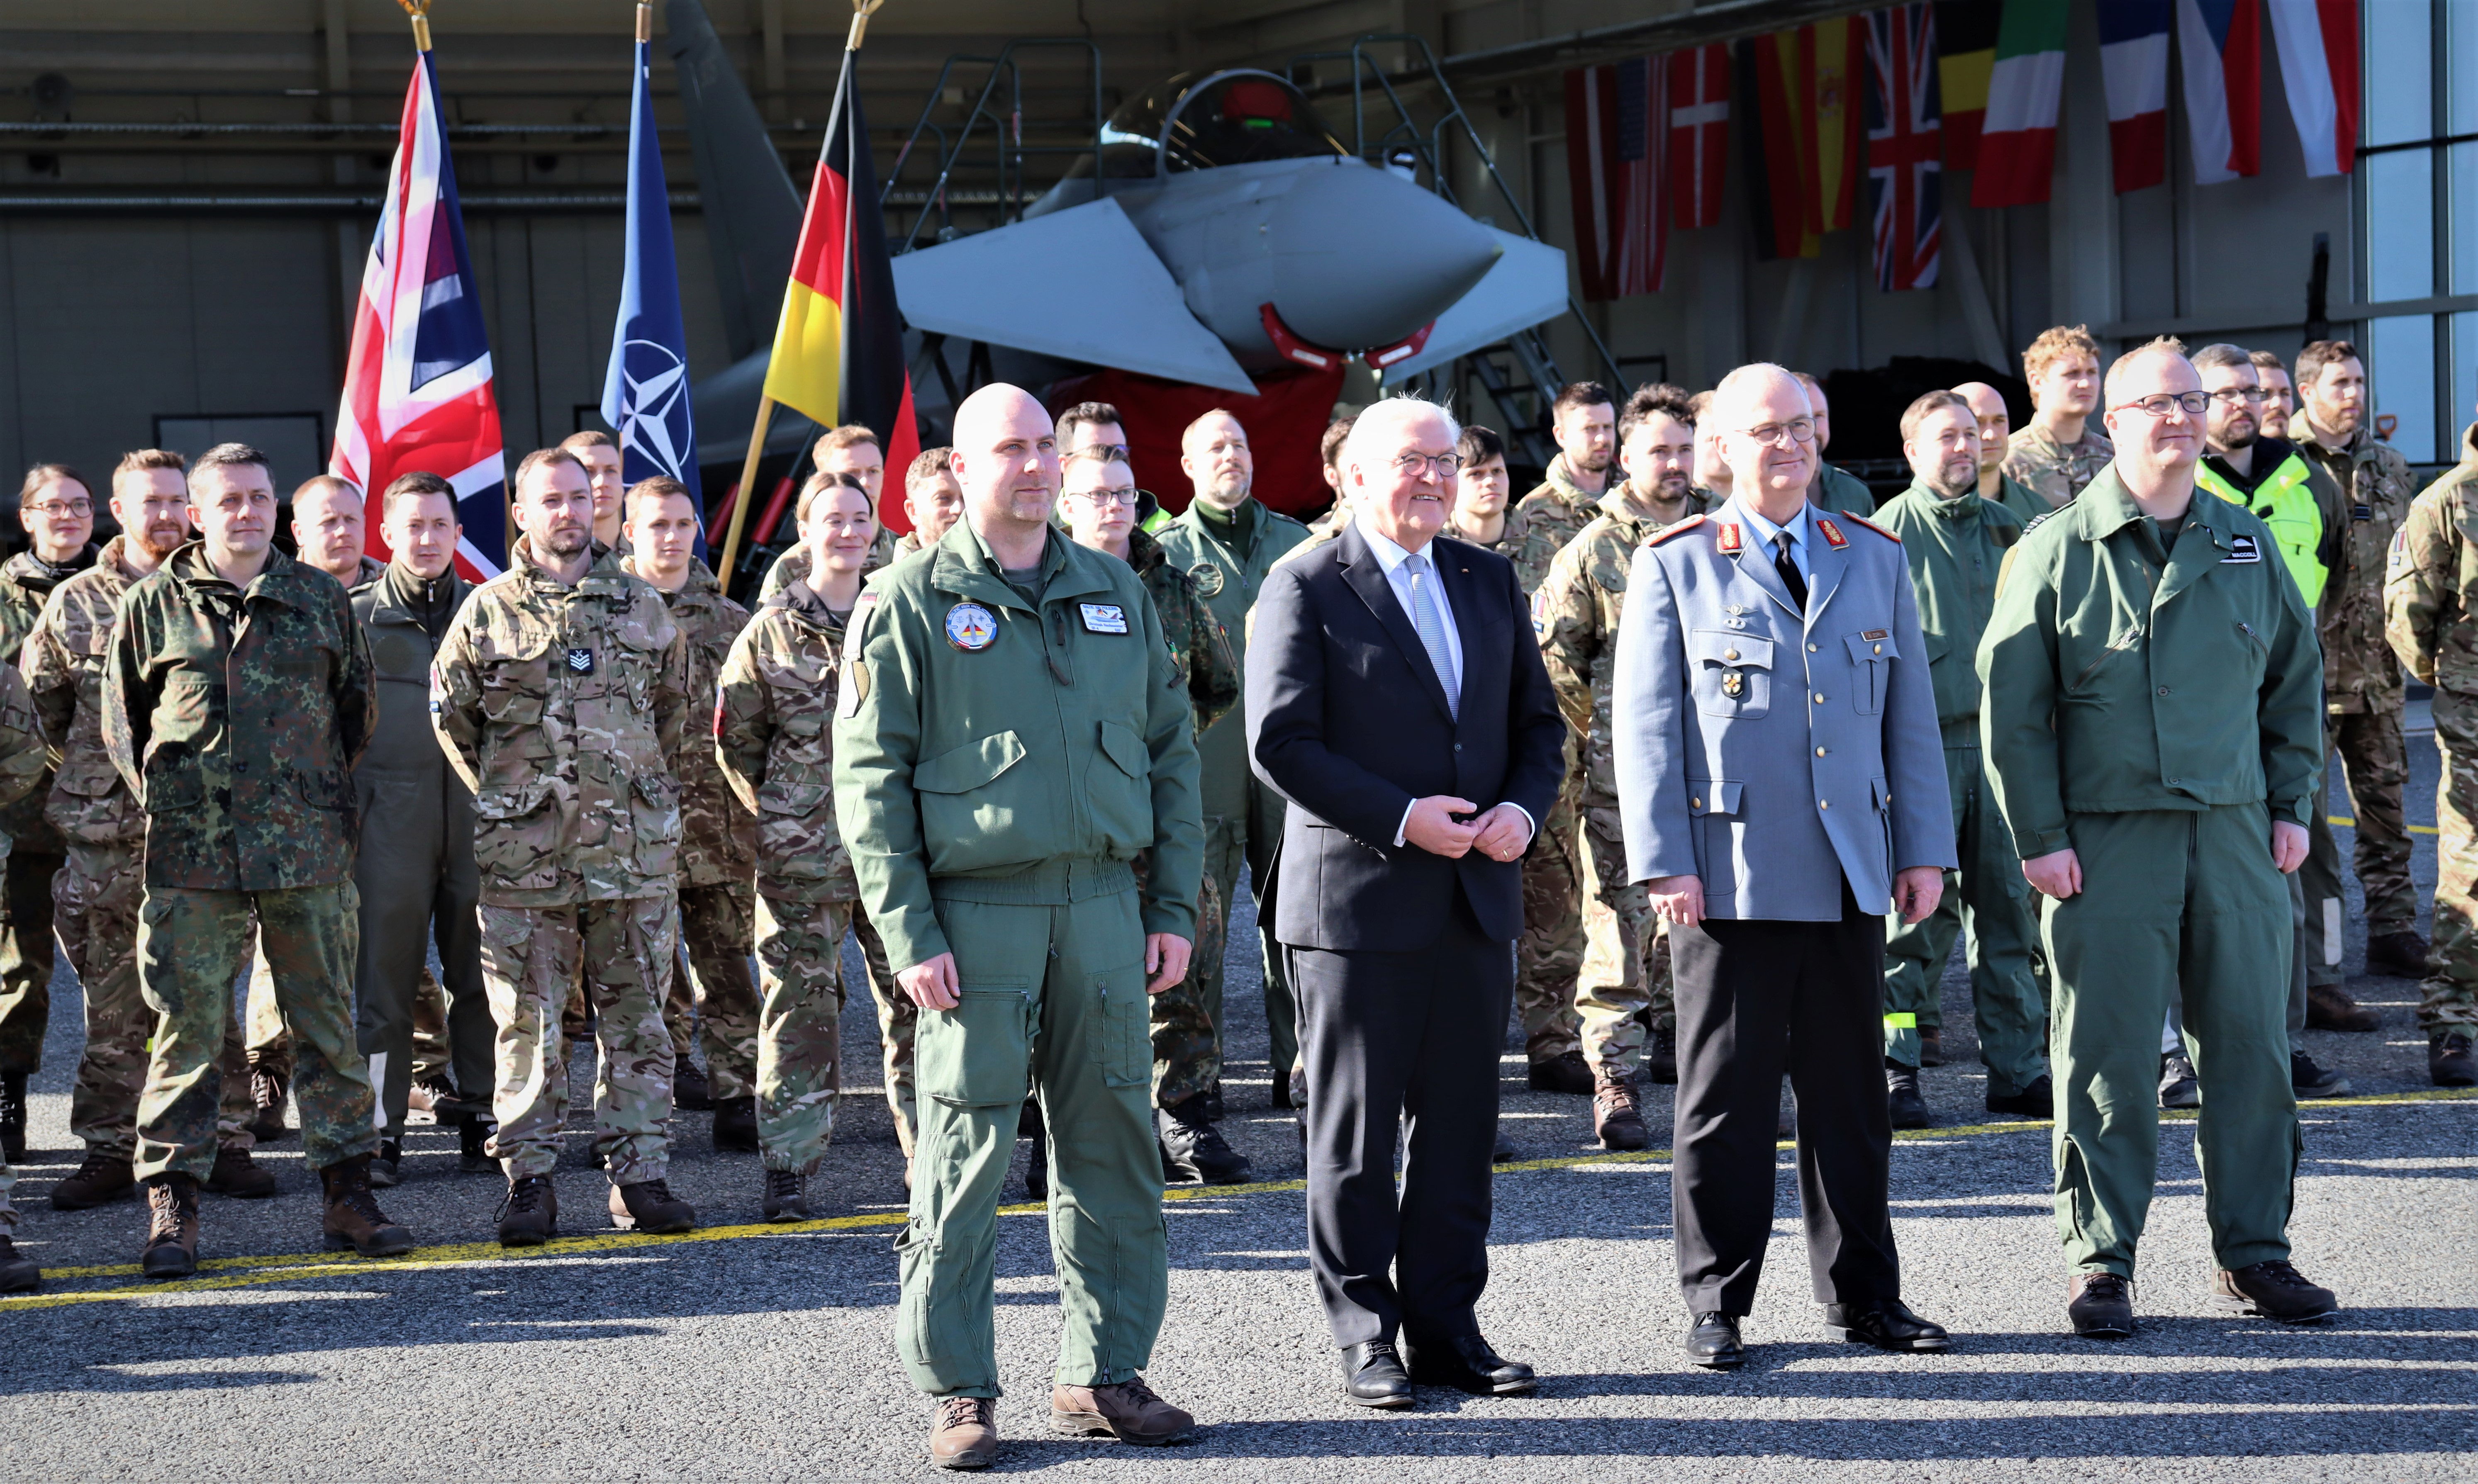 Image shows RAF and German personnel standing with the German President by a hangar.